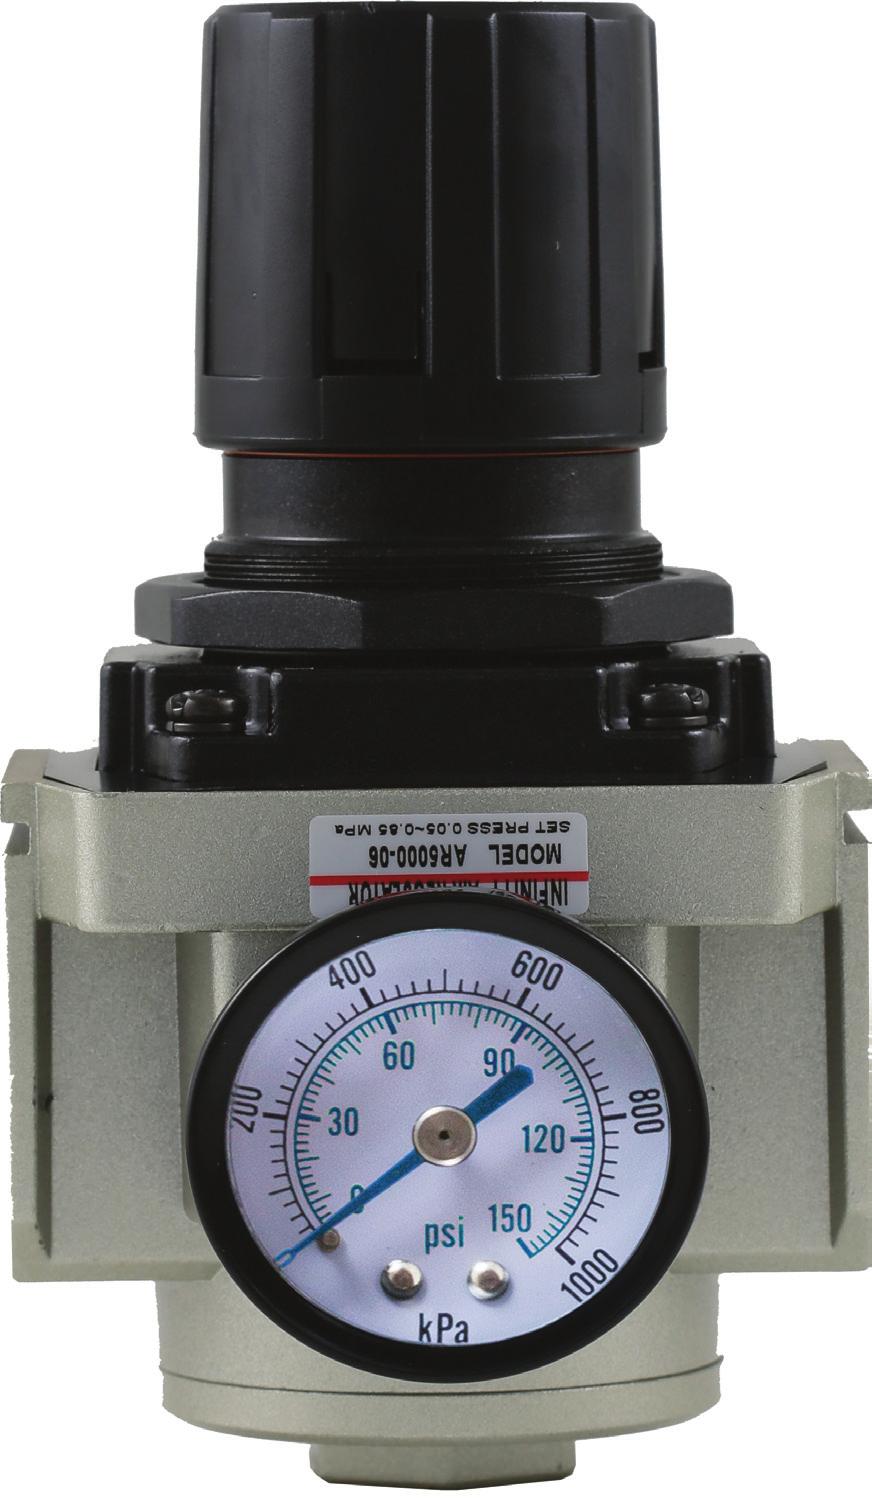 AR REGULATOR AR Regulator The series AR modular style regulator is a cost effective solution to complement your filtration system, ensuring steady pressure operation.